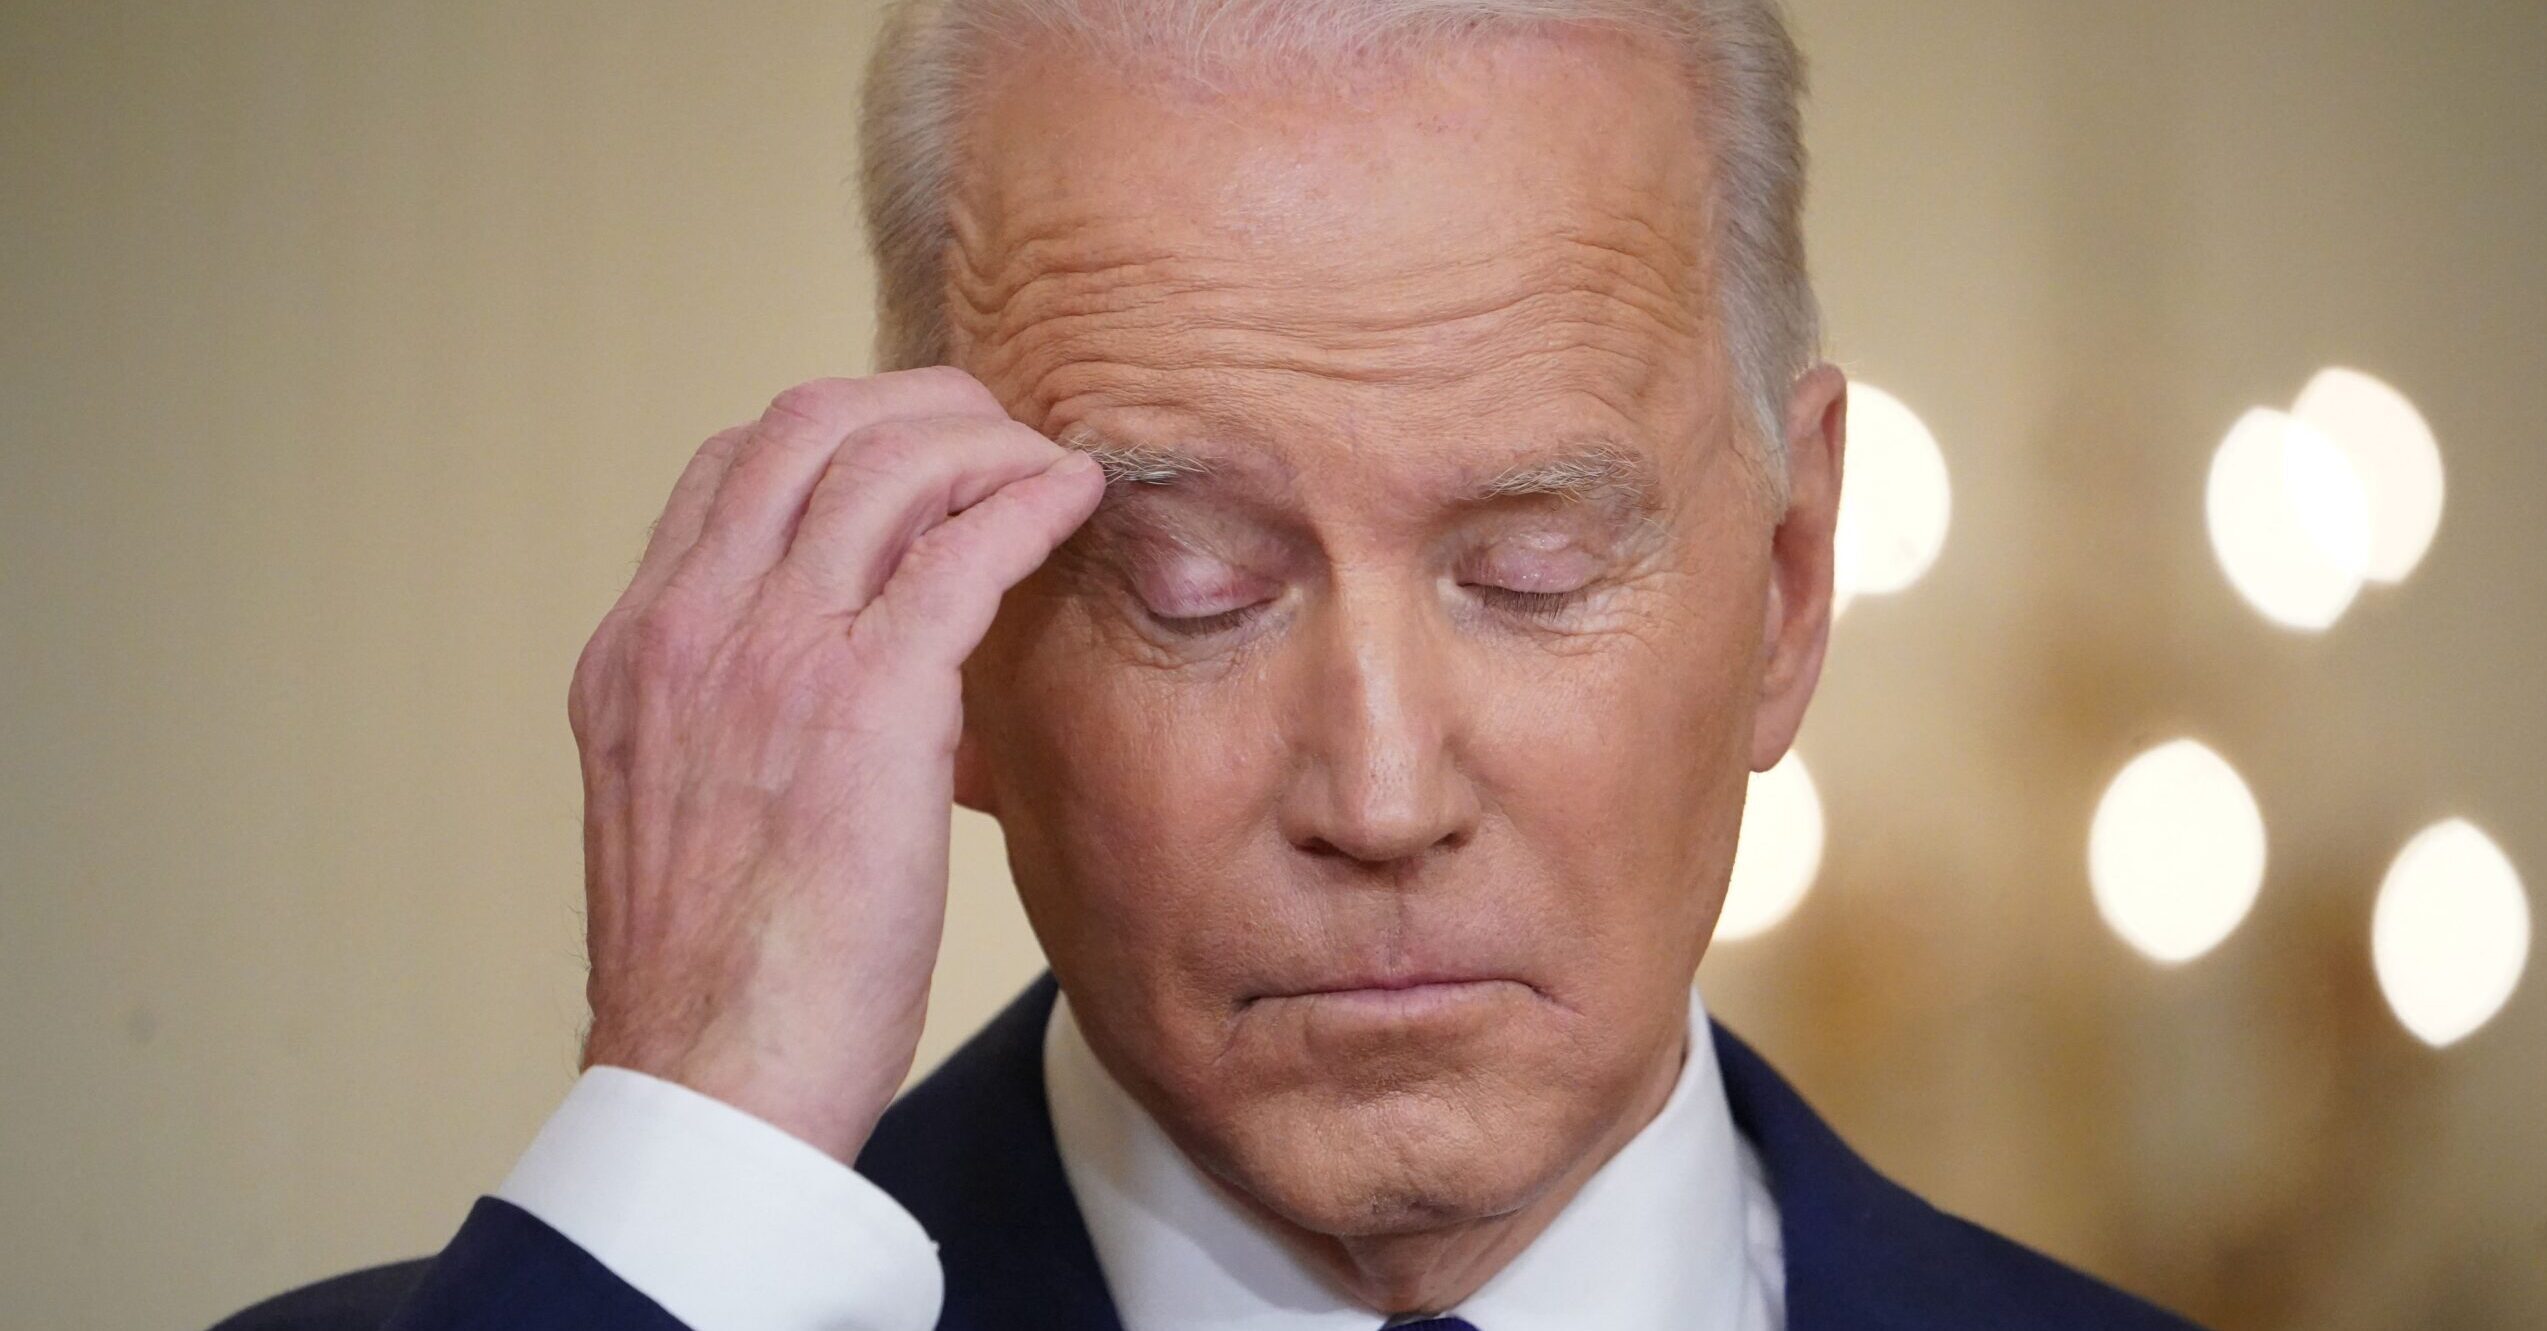 Gallup: Biden’s Approval Rating Drops to ‘Lowest for an Elected President’ In Sixth Quarter